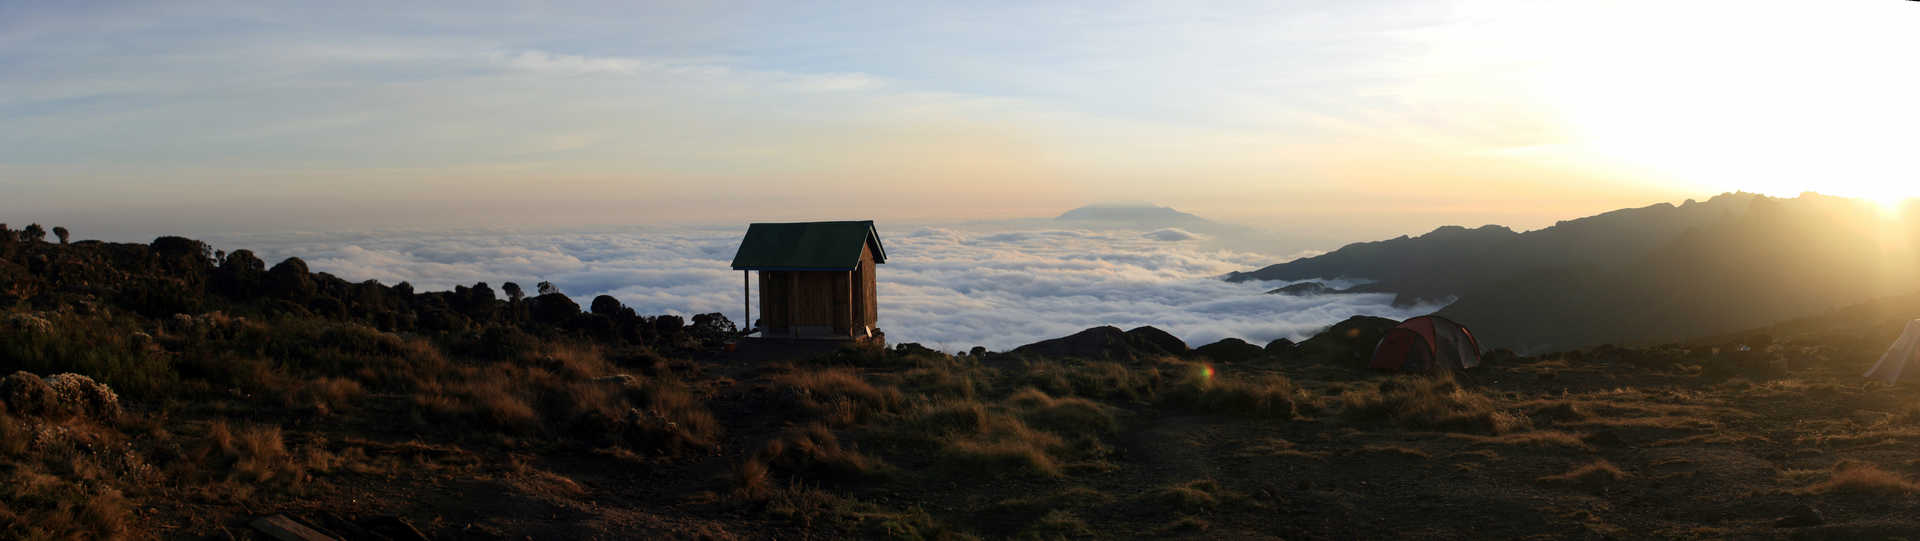 camp-above-the-clouds